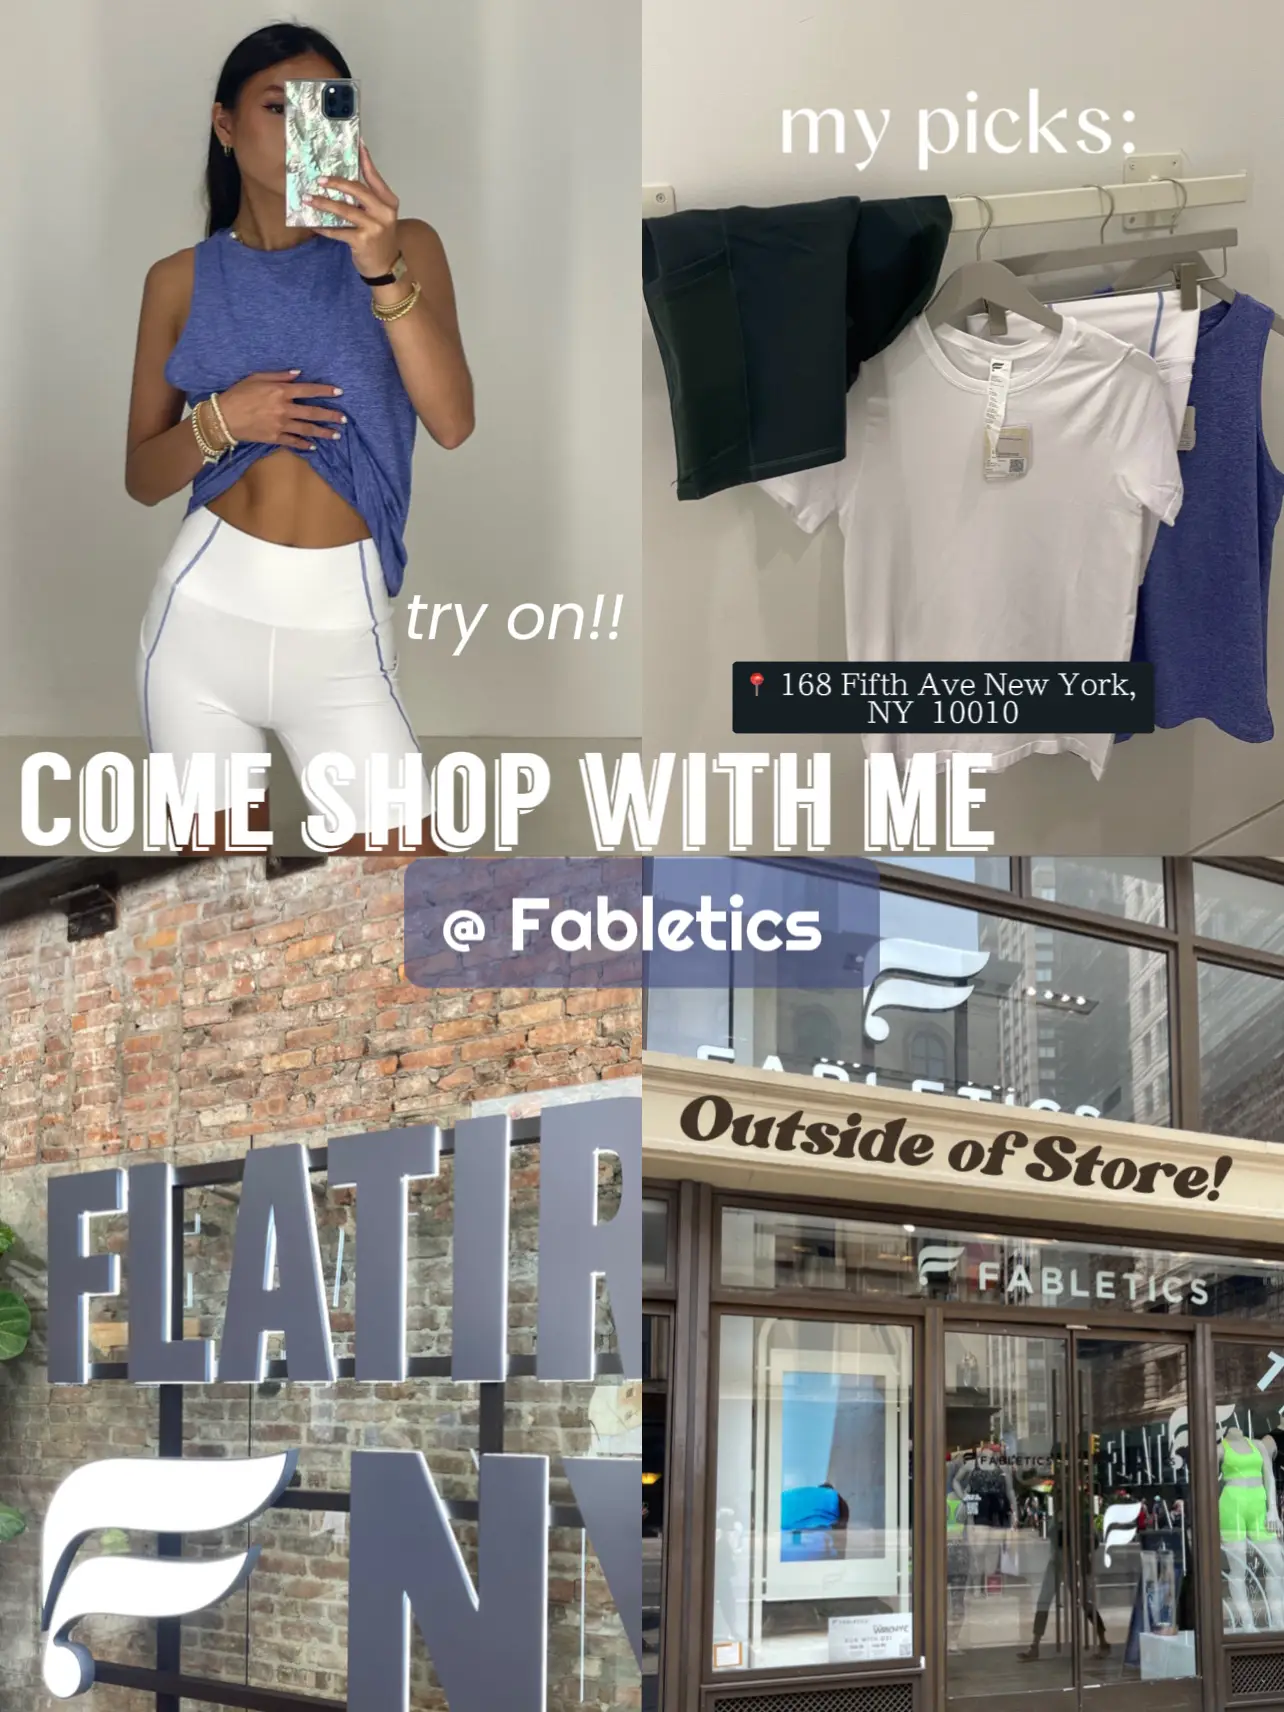 Why did the deals on fabletics go away after one purchase｜TikTok